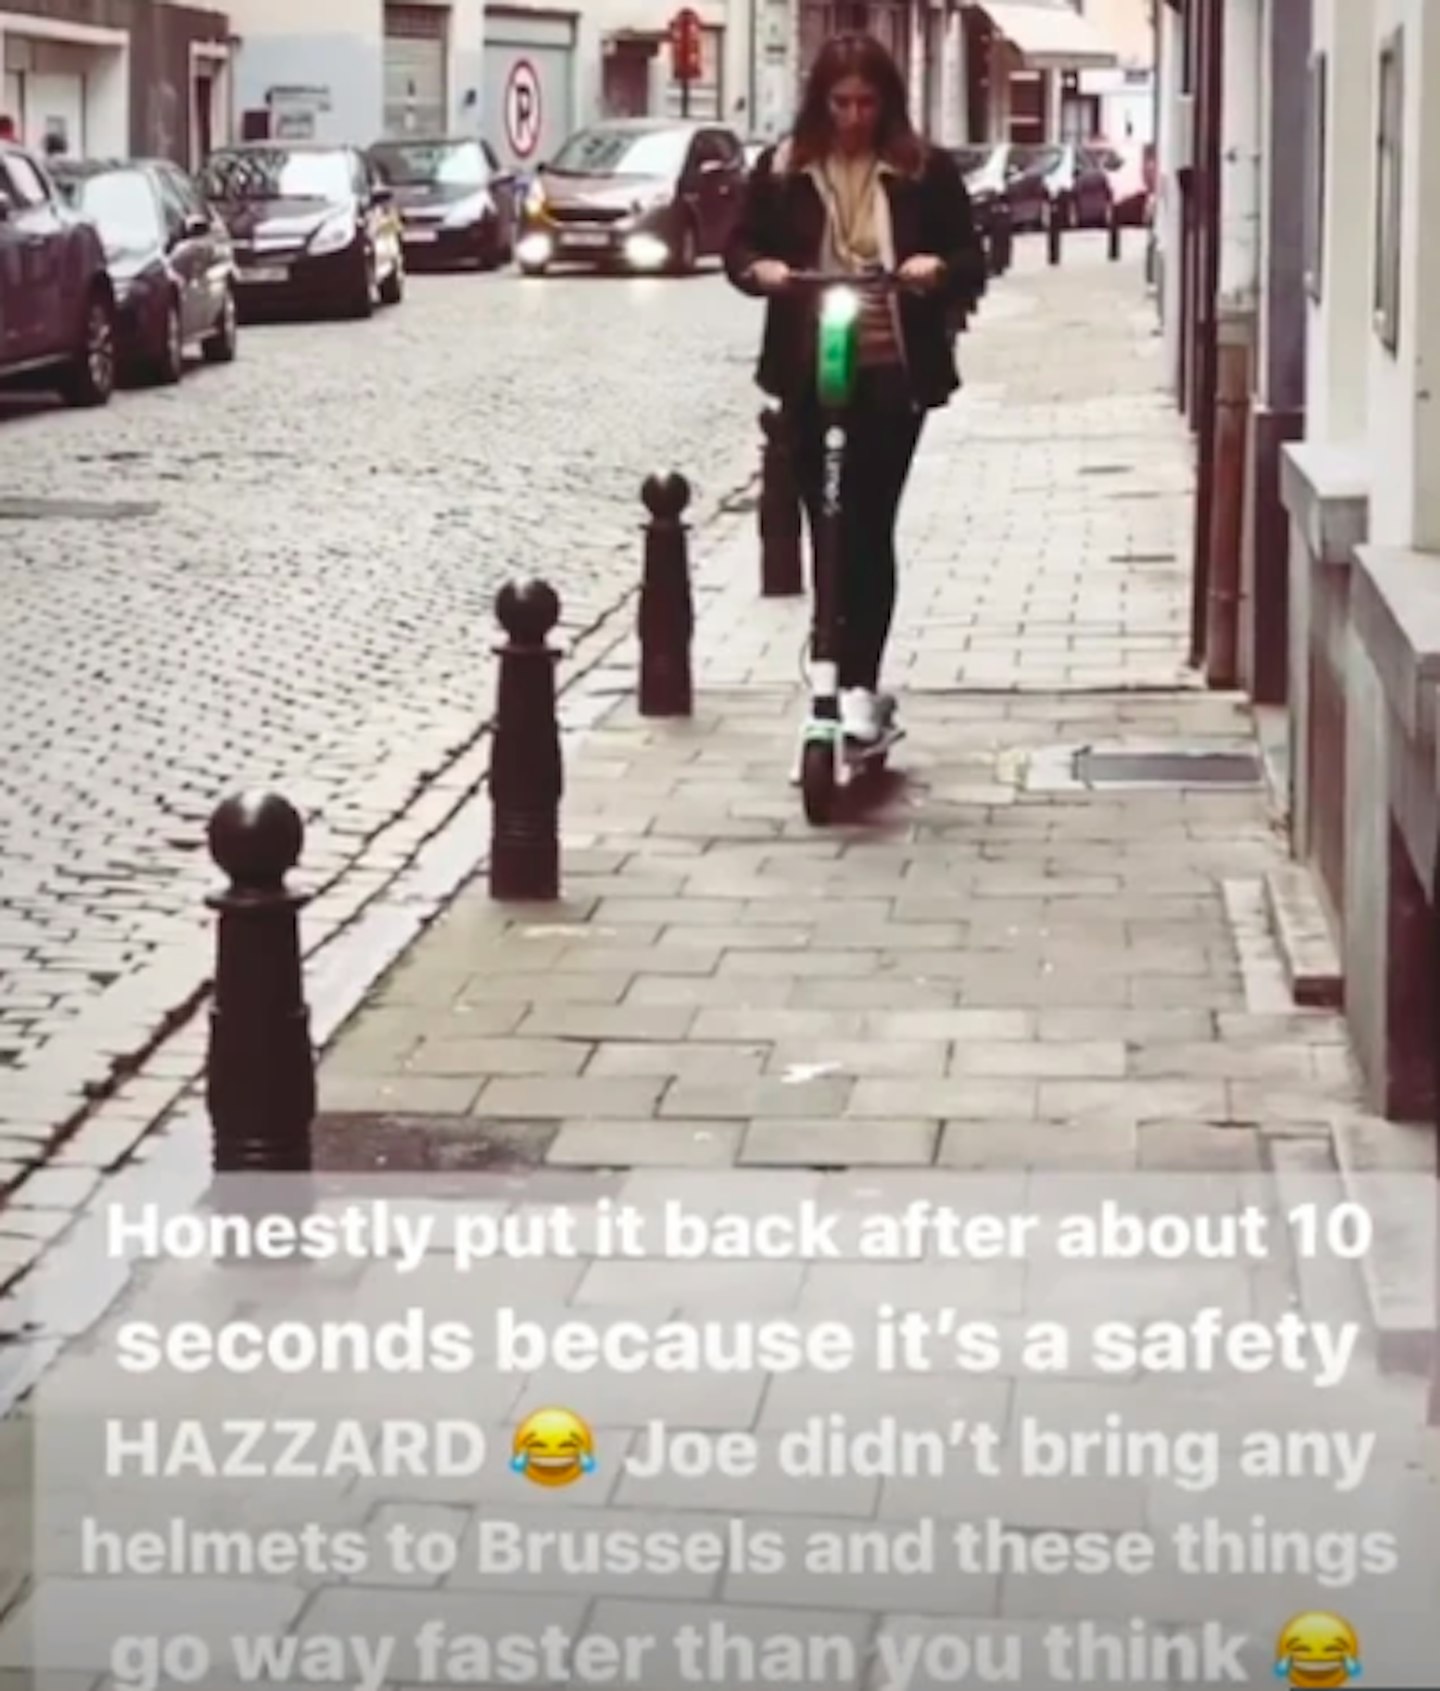 Stacey Solomon and Joe Swash went away for her birthday